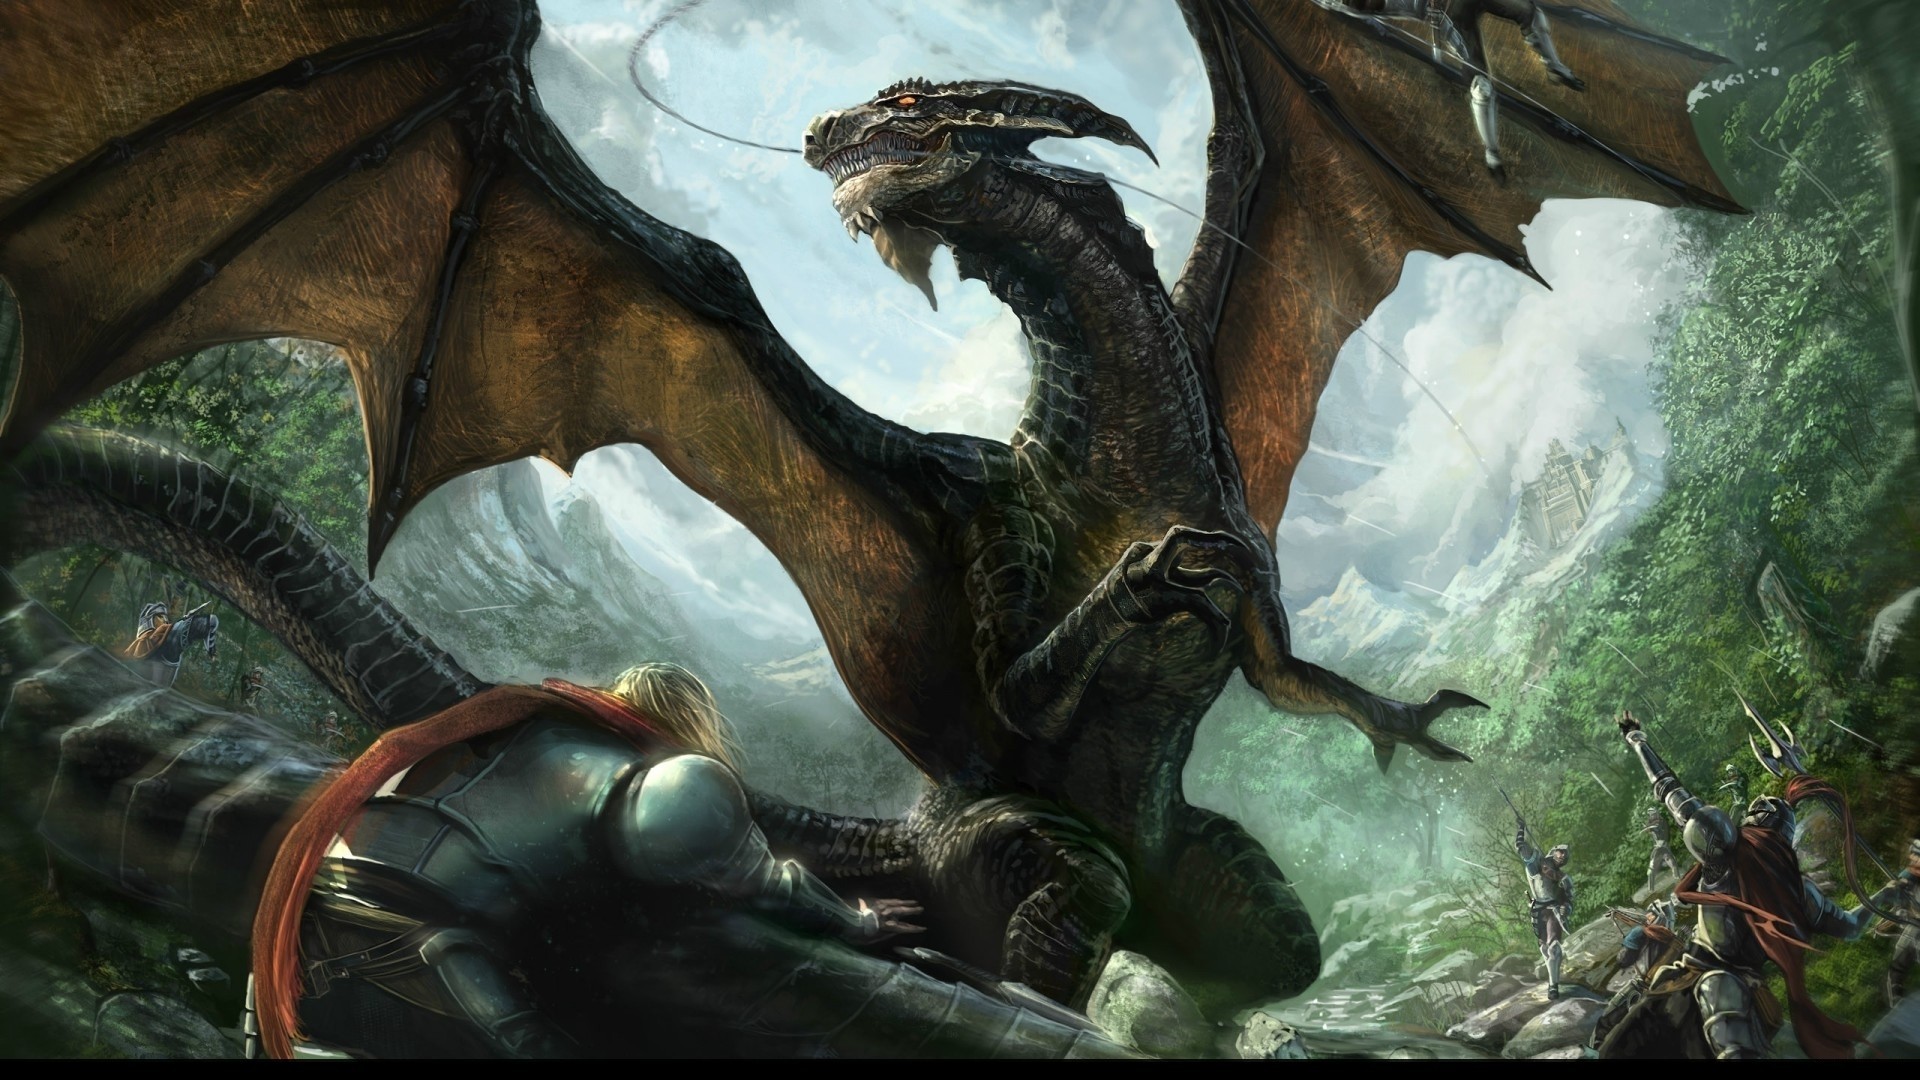 1920x1080 Dragon Wallpapers Picture